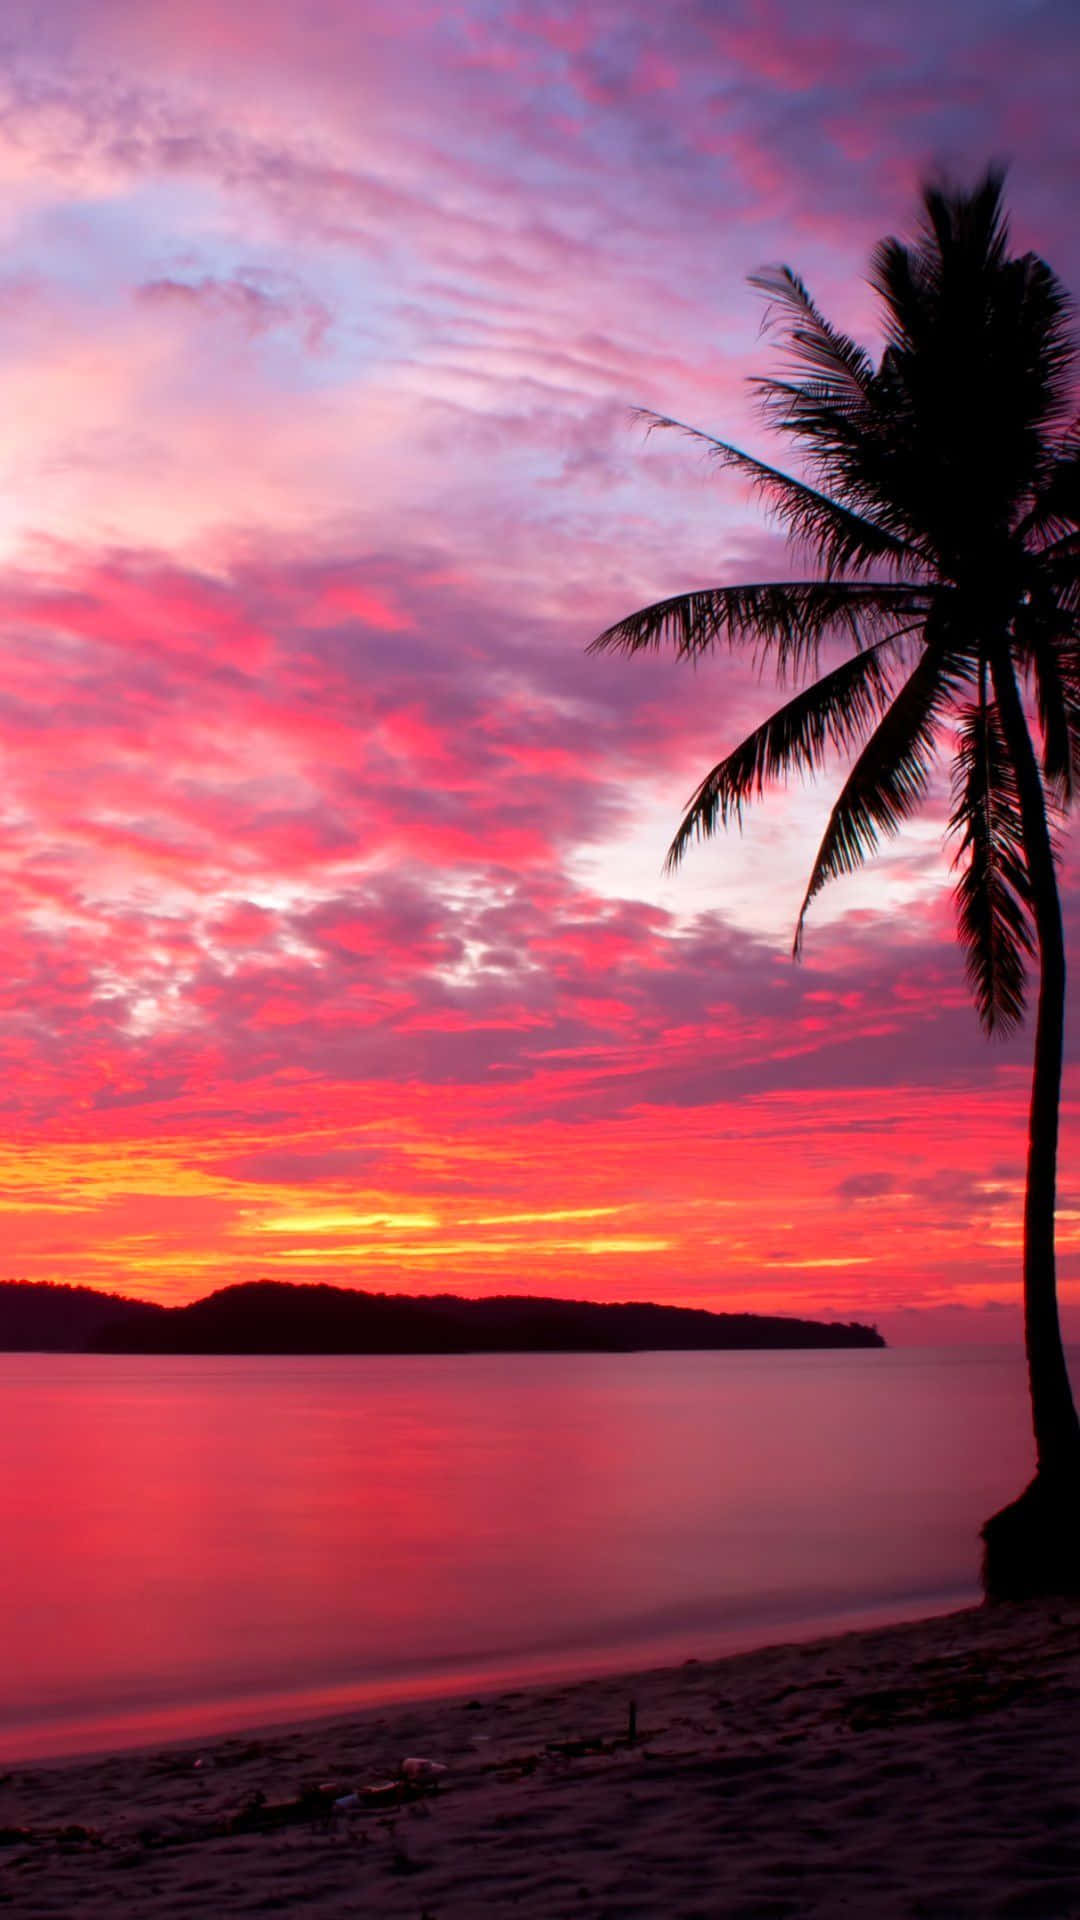 Experience the beauty of a tranquil beach sunset.